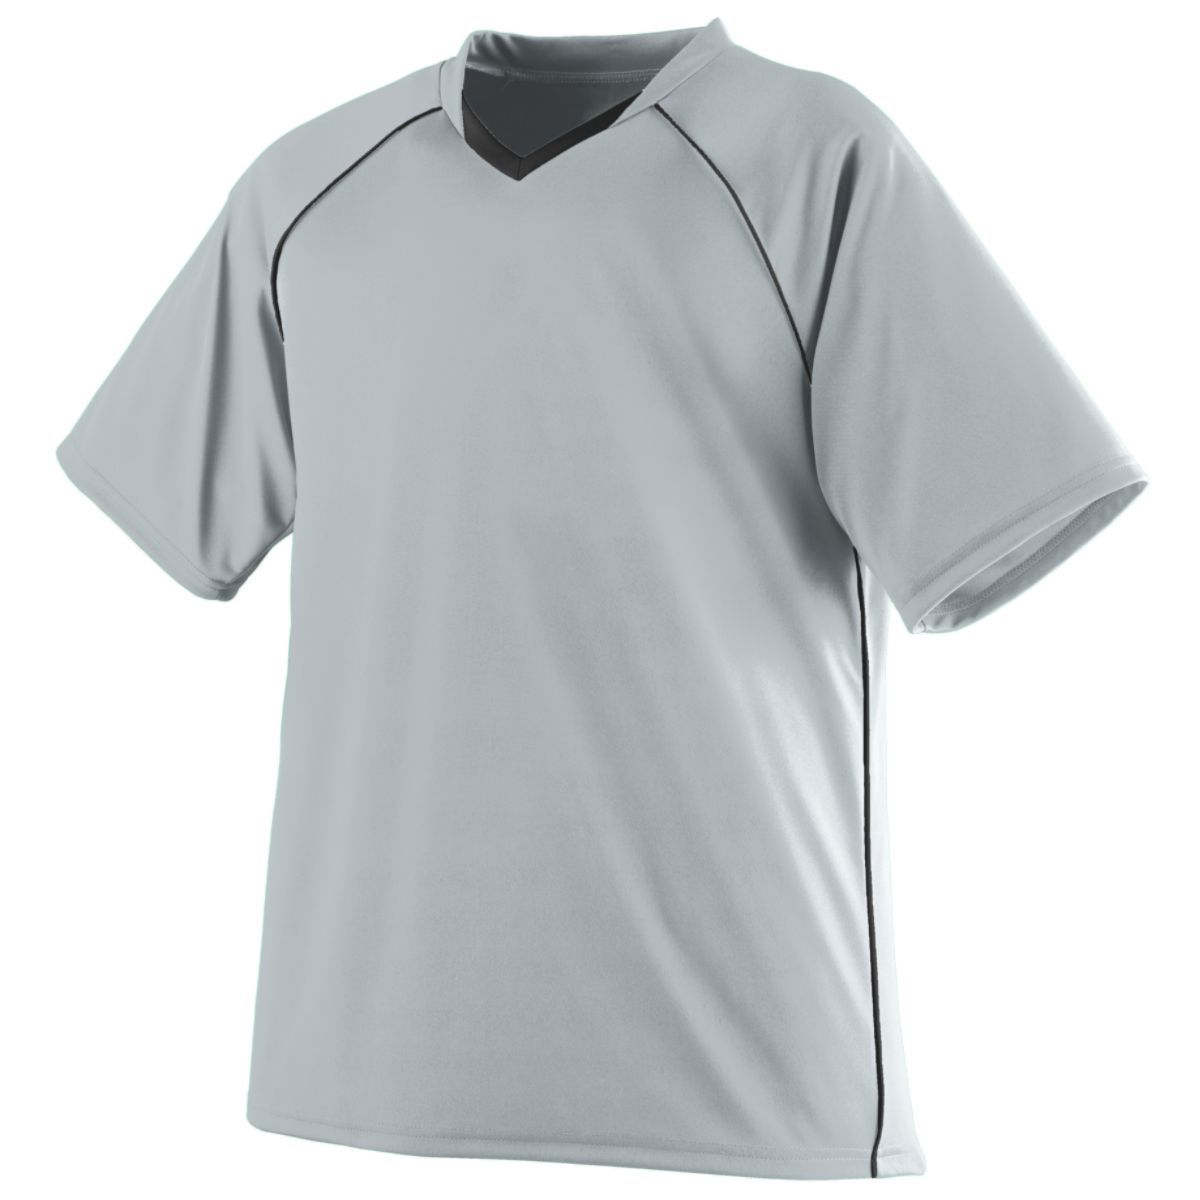 Augusta Sportswear Youth Striker Jersey in Silver/Black  -Part of the Youth, Youth-Jersey, Augusta-Products, Soccer, Shirts, All-Sports-1 product lines at KanaleyCreations.com